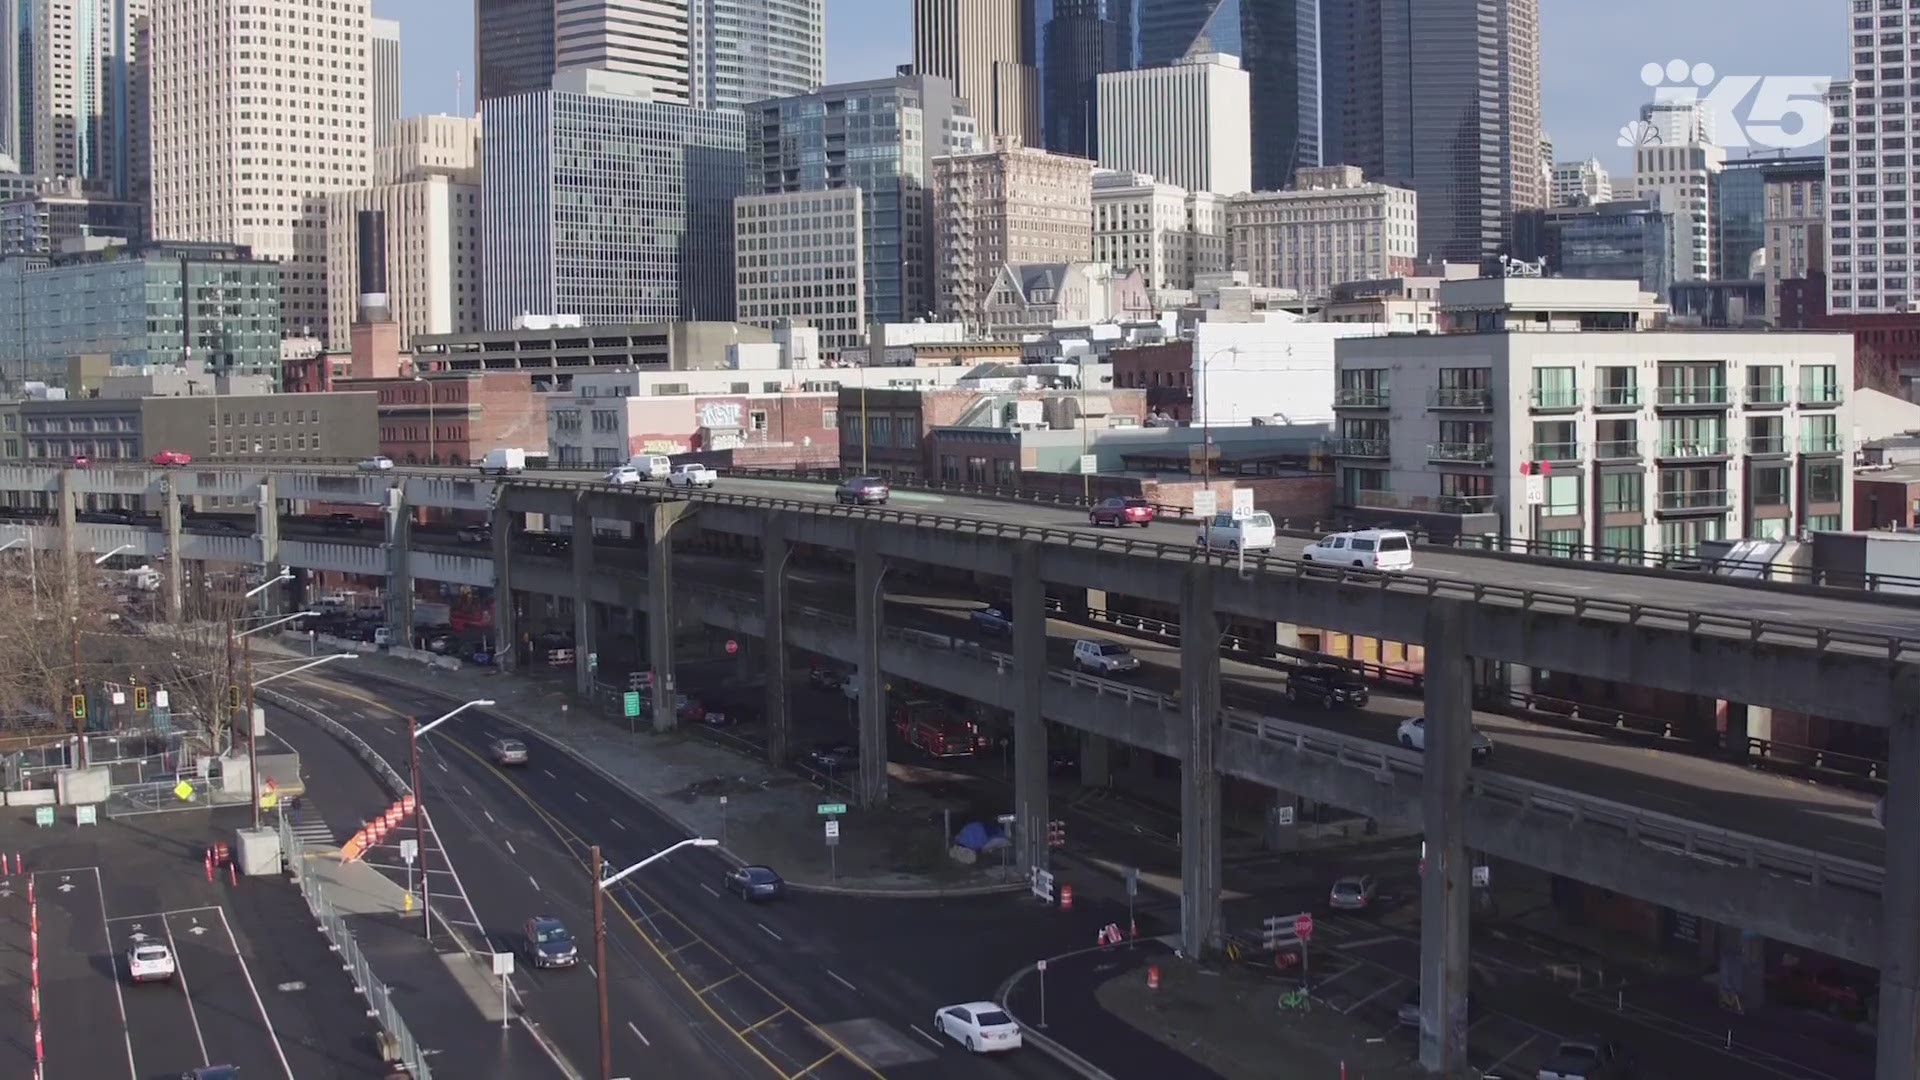 Take in an aerial view of Seattle’s Alaskan Way Viaduct on January 11, 2018.